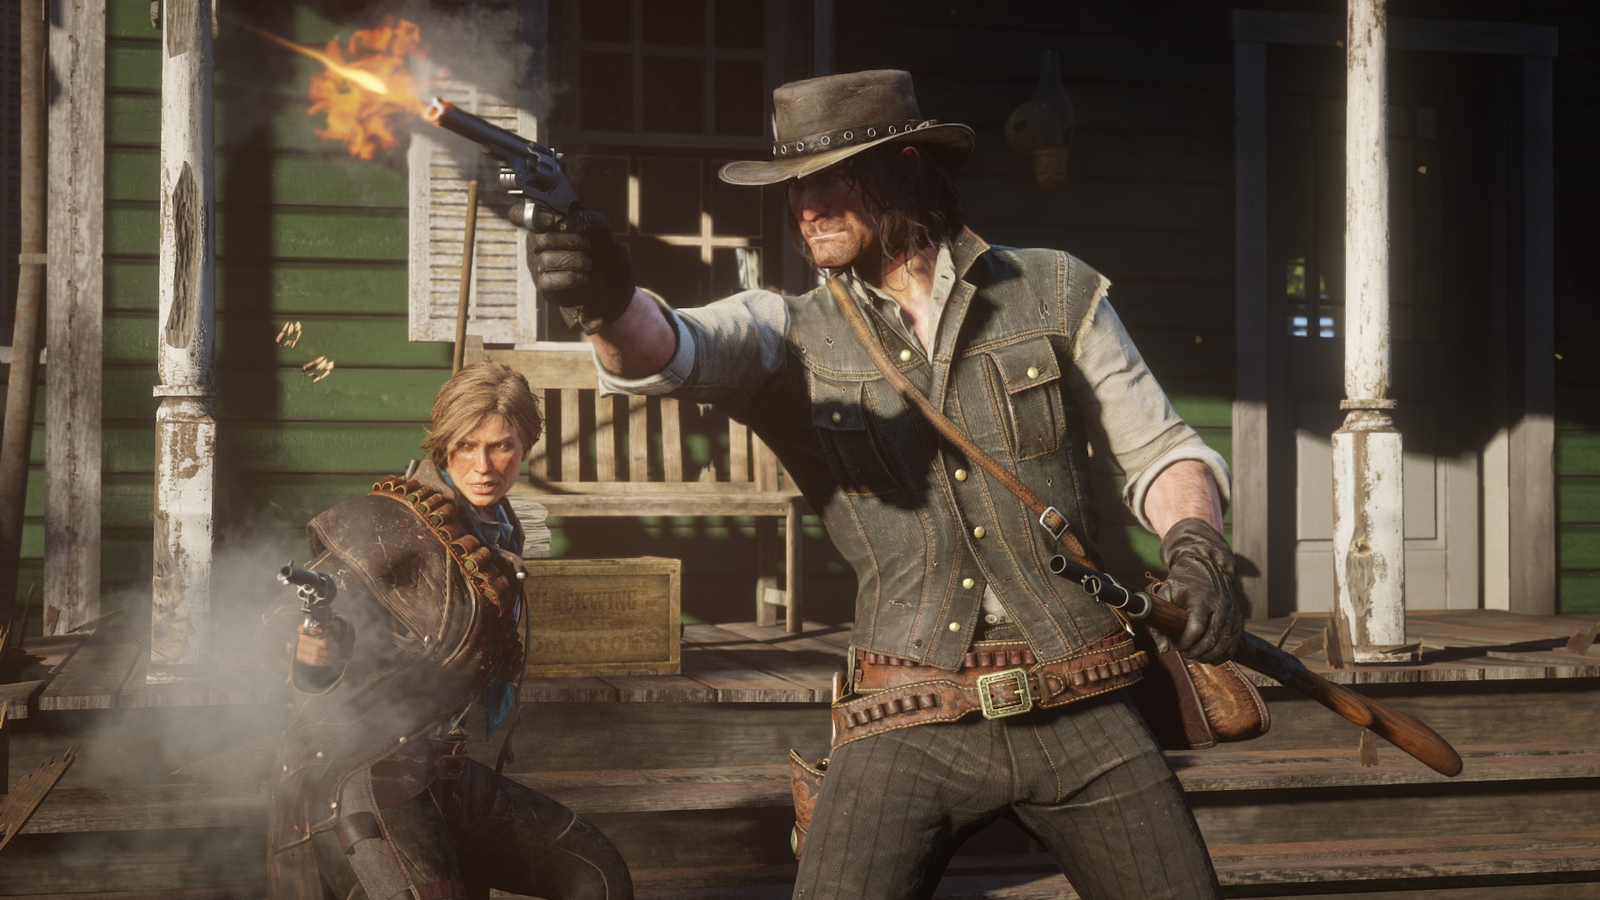 Red Dead Redemption 2 hits new player count record as it continues selling  well - RockstarINTEL